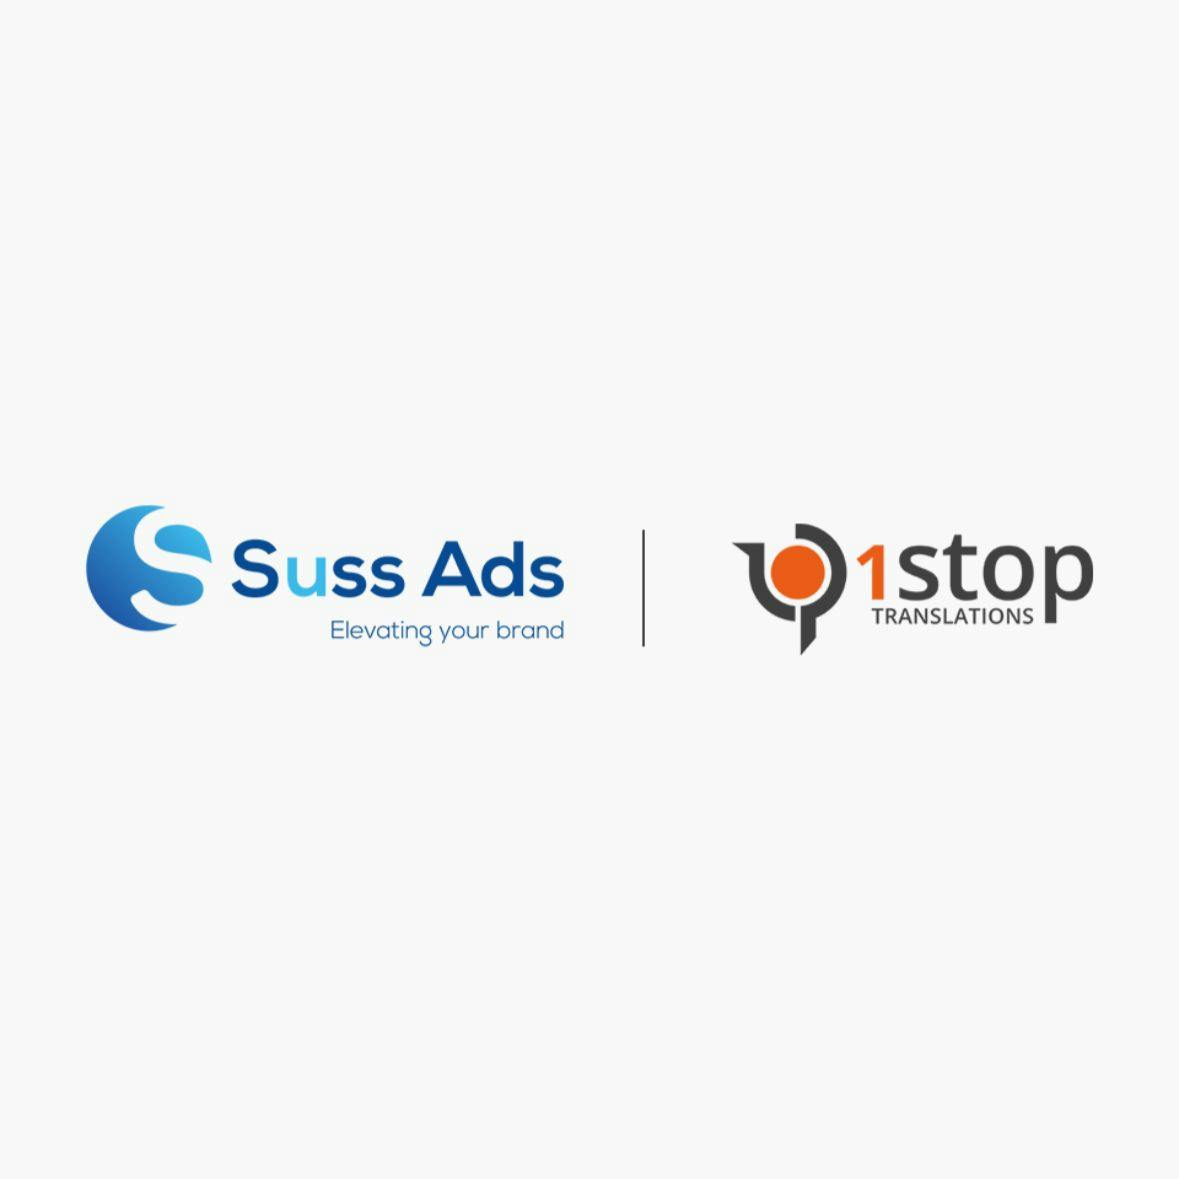 1Stop and Suss Ads announce their partnership